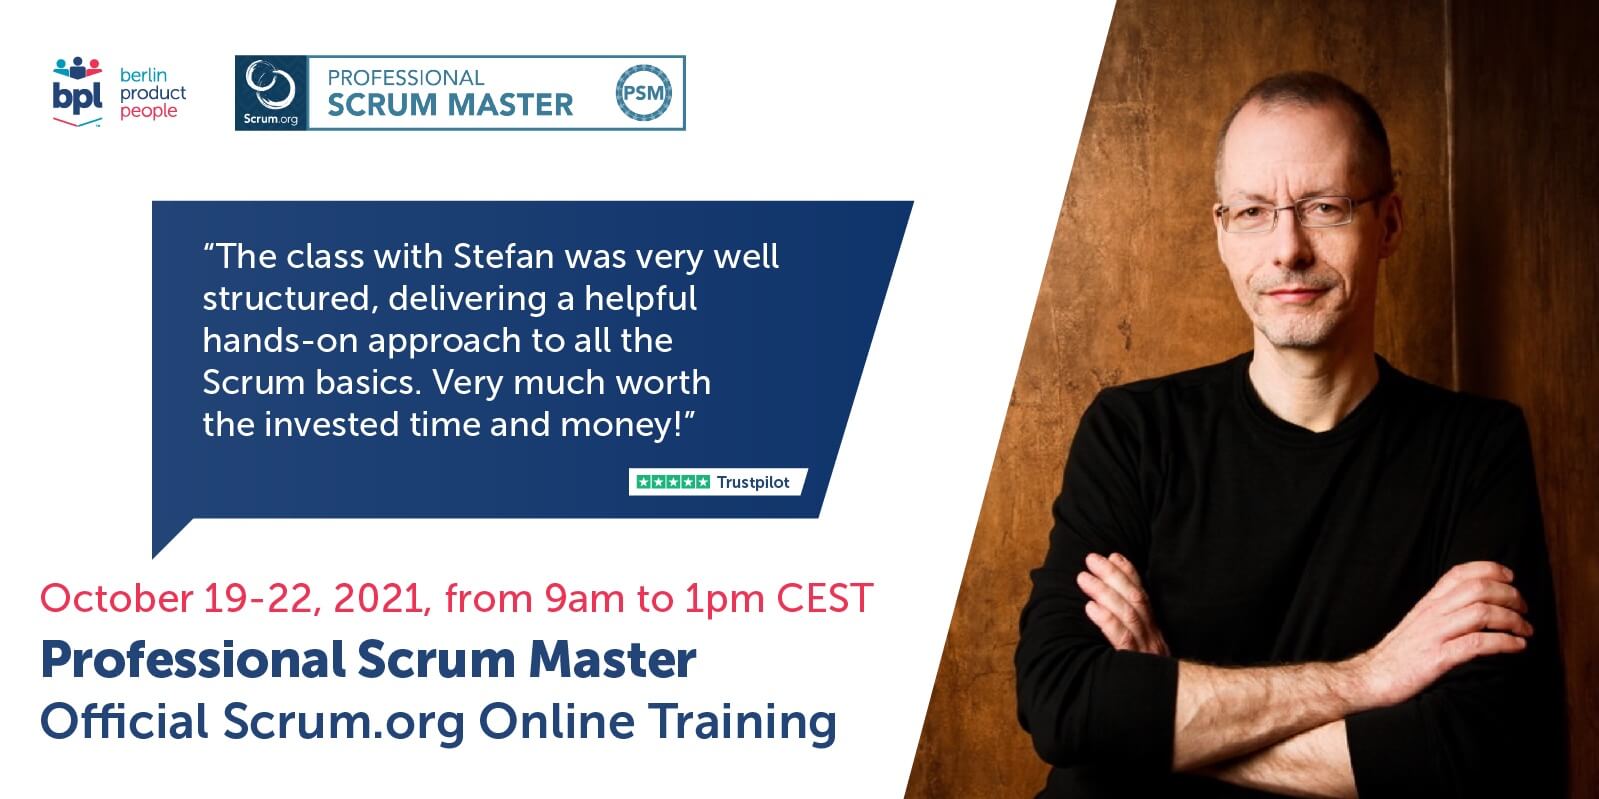 Professional Scrum Master Online Training w/ PSM I Certificate: October 19-22, 2021 — Berlin Product People GmbH